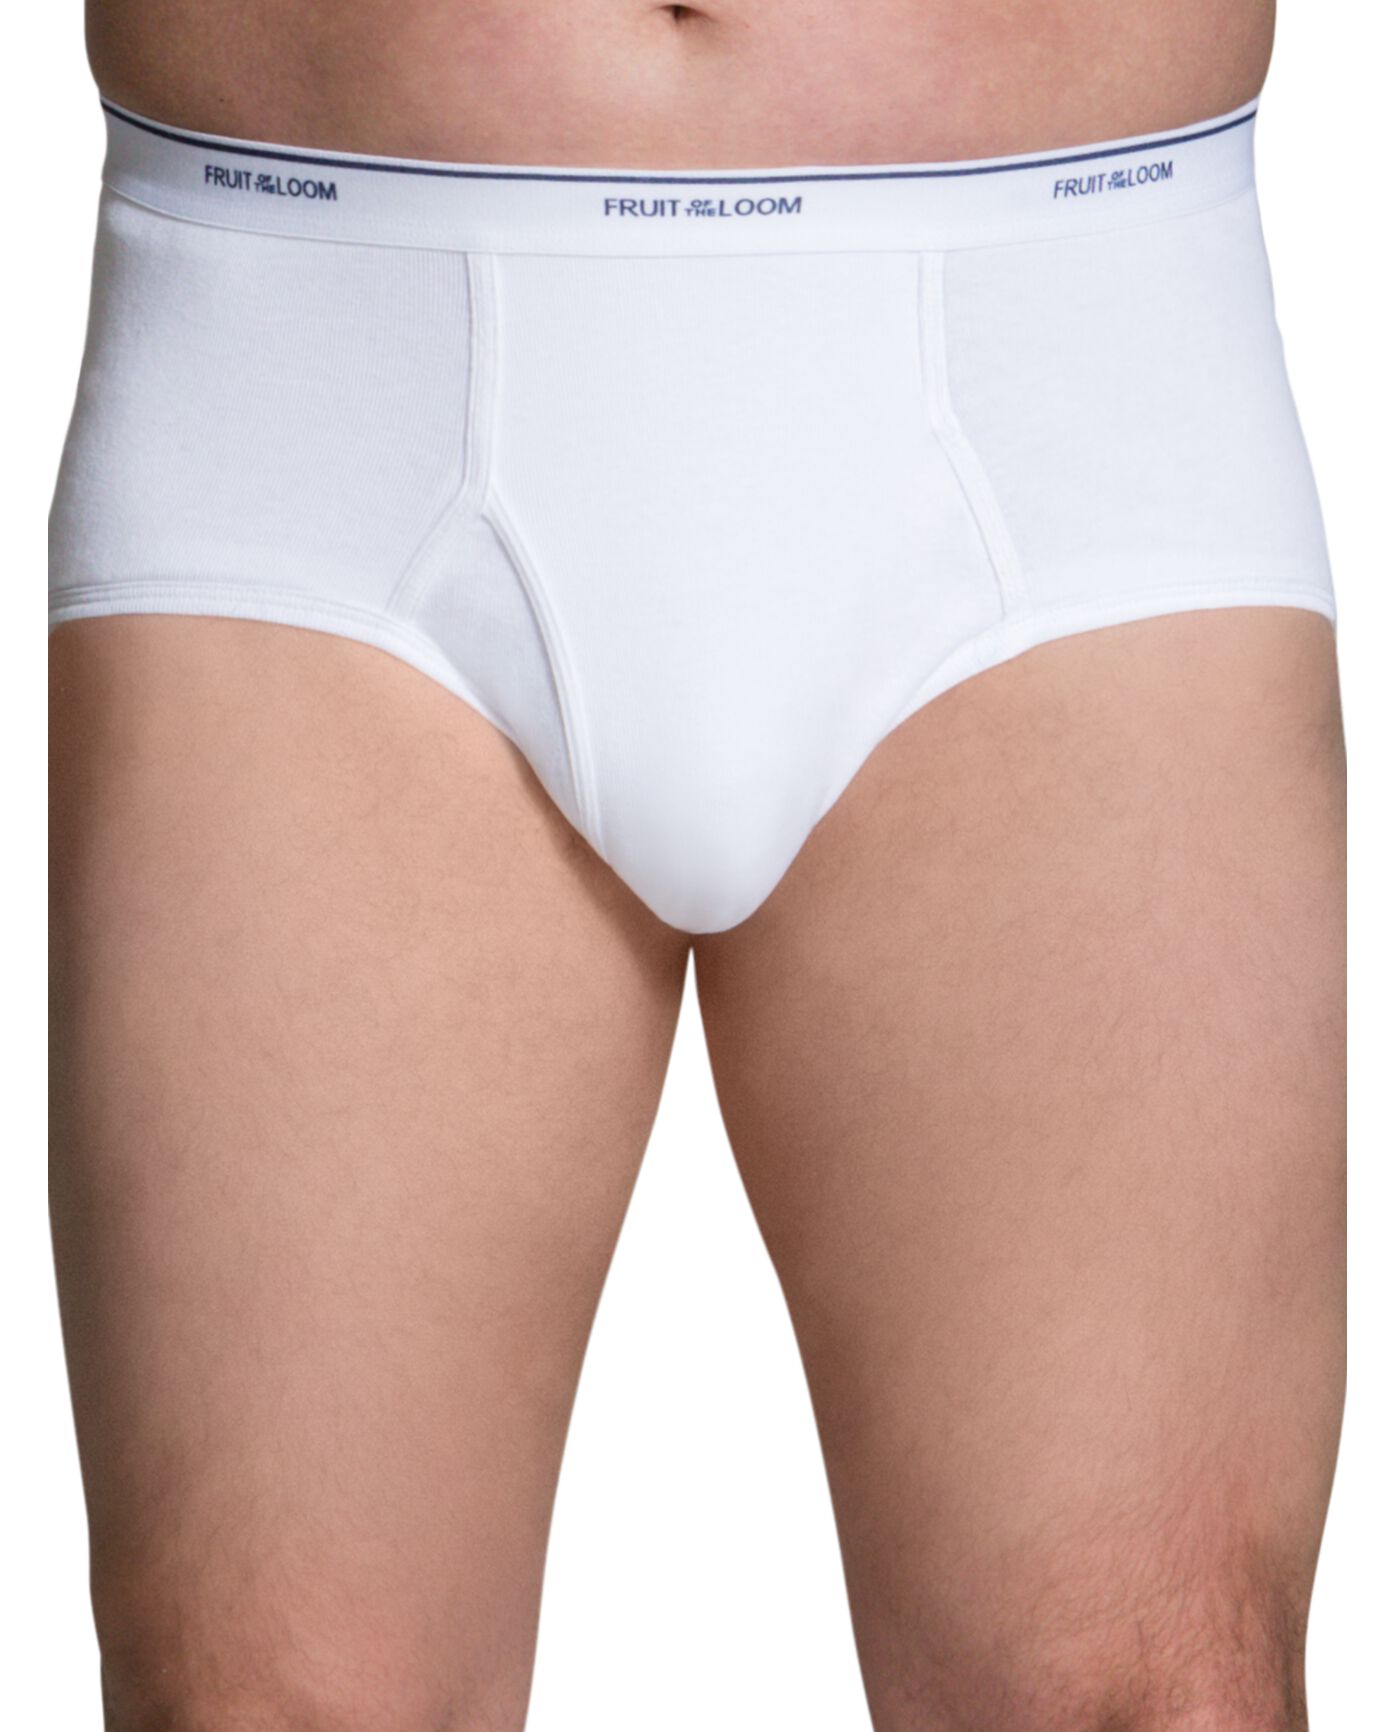 Fruit of the Loom Womens Cotton White Brief